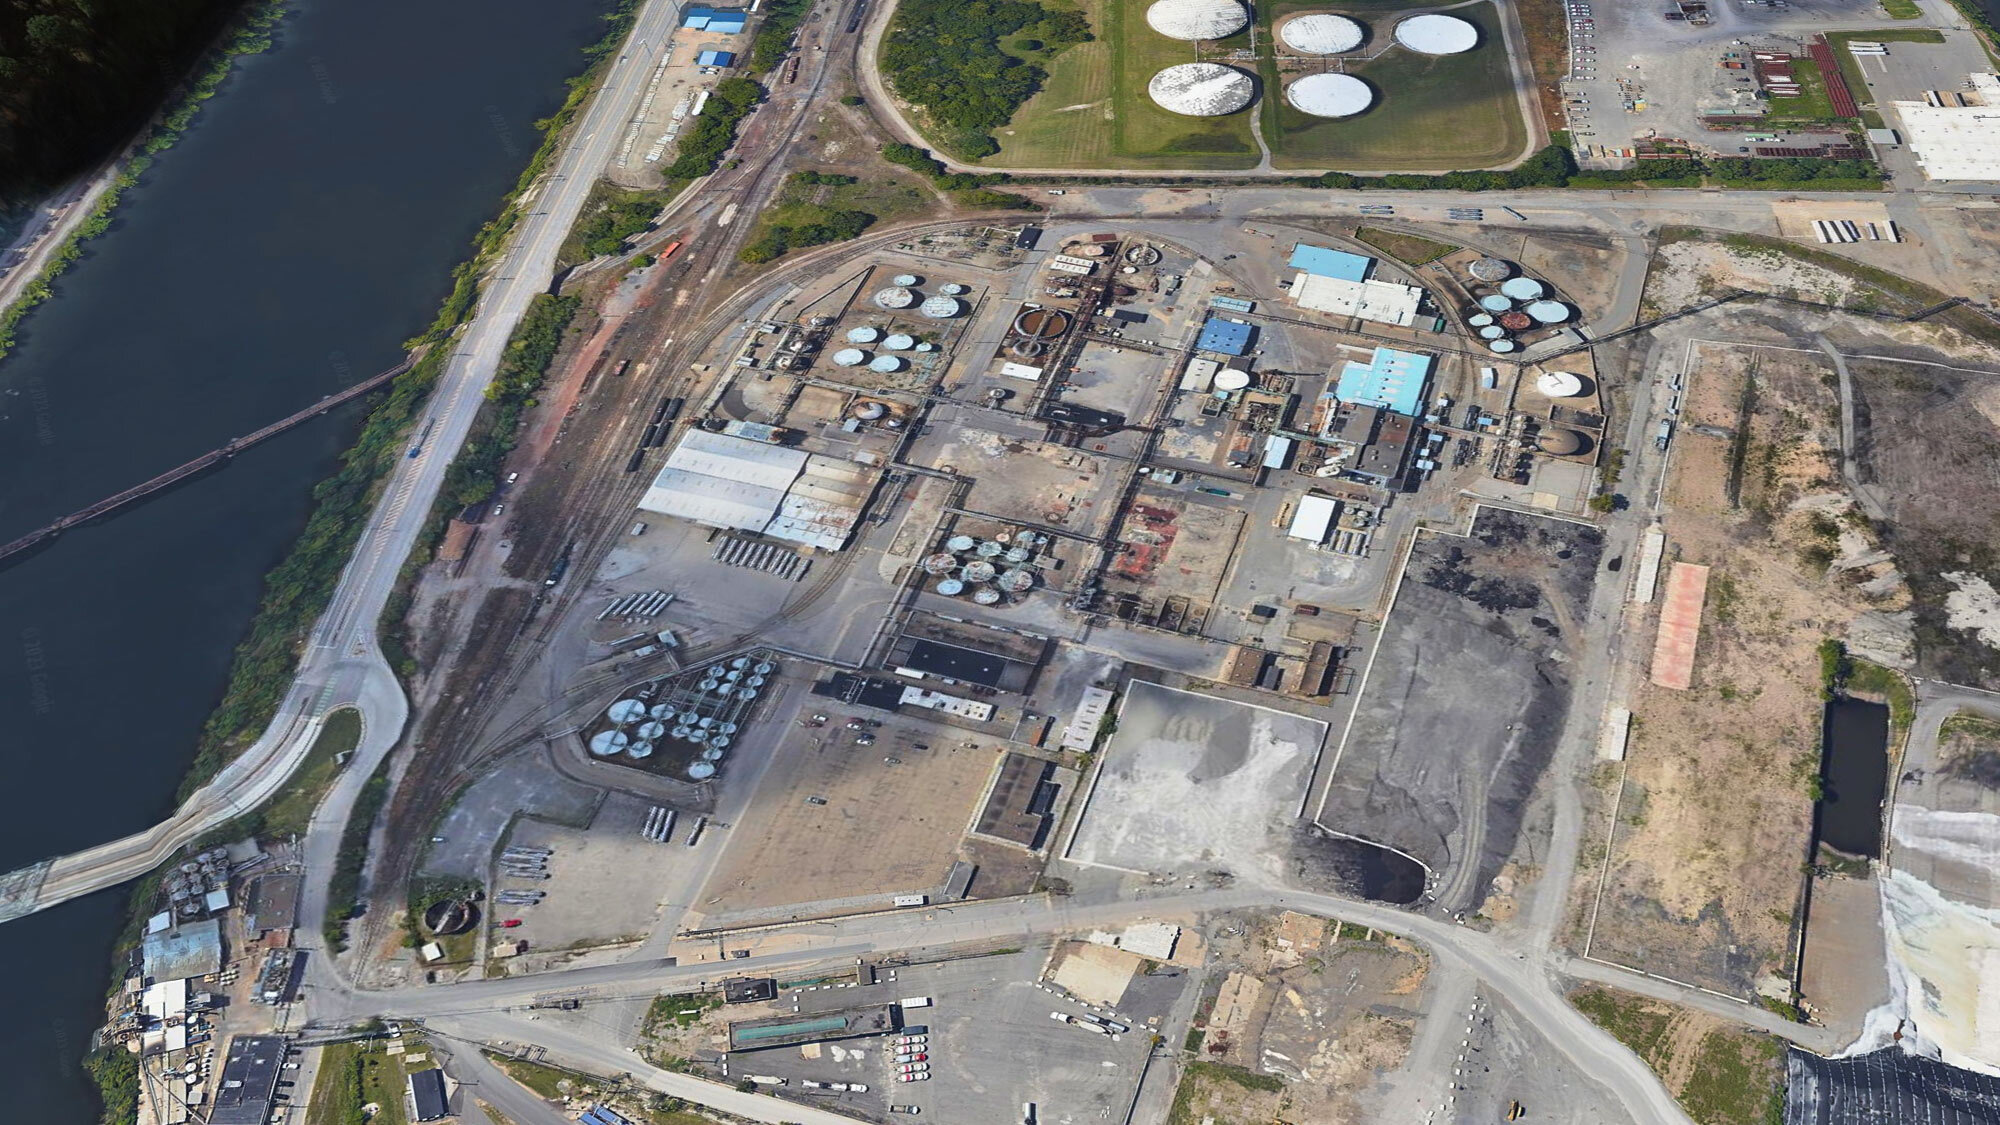 The former site of the Shenango Coke Works in Pittsburgh is seen in an aerial shot.